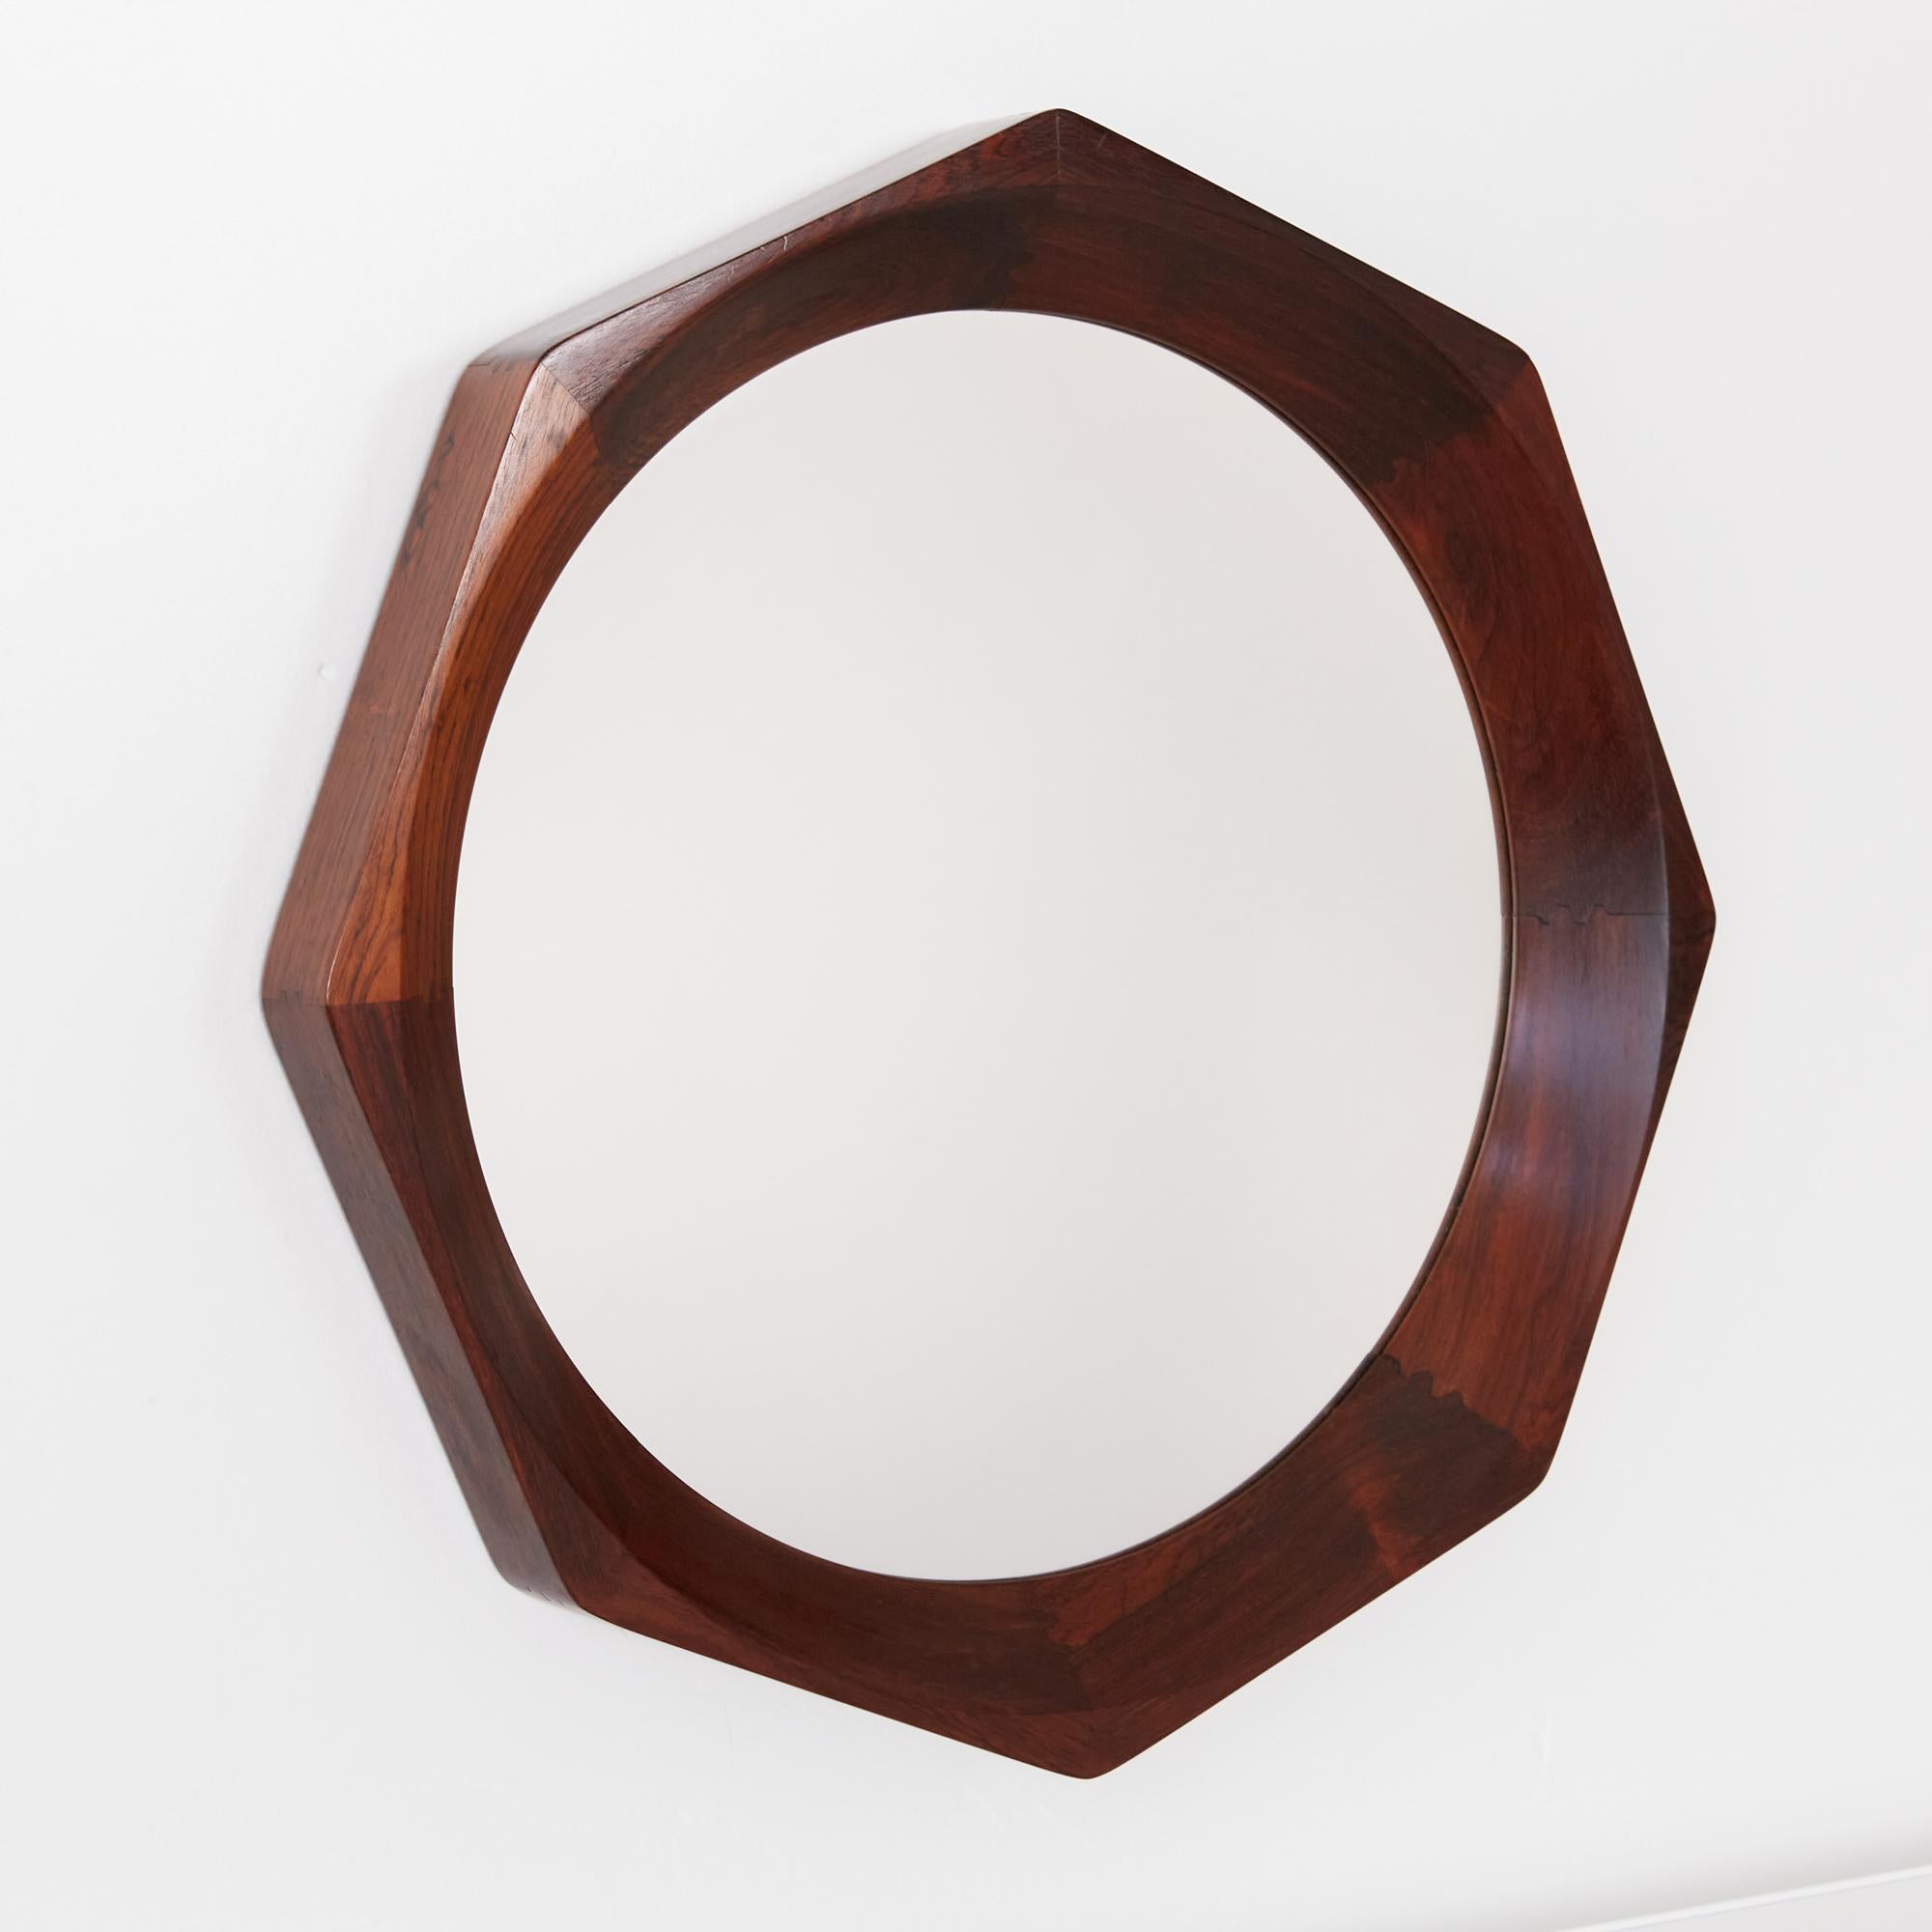 Octagonal rosewood wall mirror by BVK, Denmark, circa 1960s. The mirror features an oiled concave rosewood frame with exposed joinery details and is marked [Made in Denmark]. BVK was best known for making furniture and decor for the notable Danish